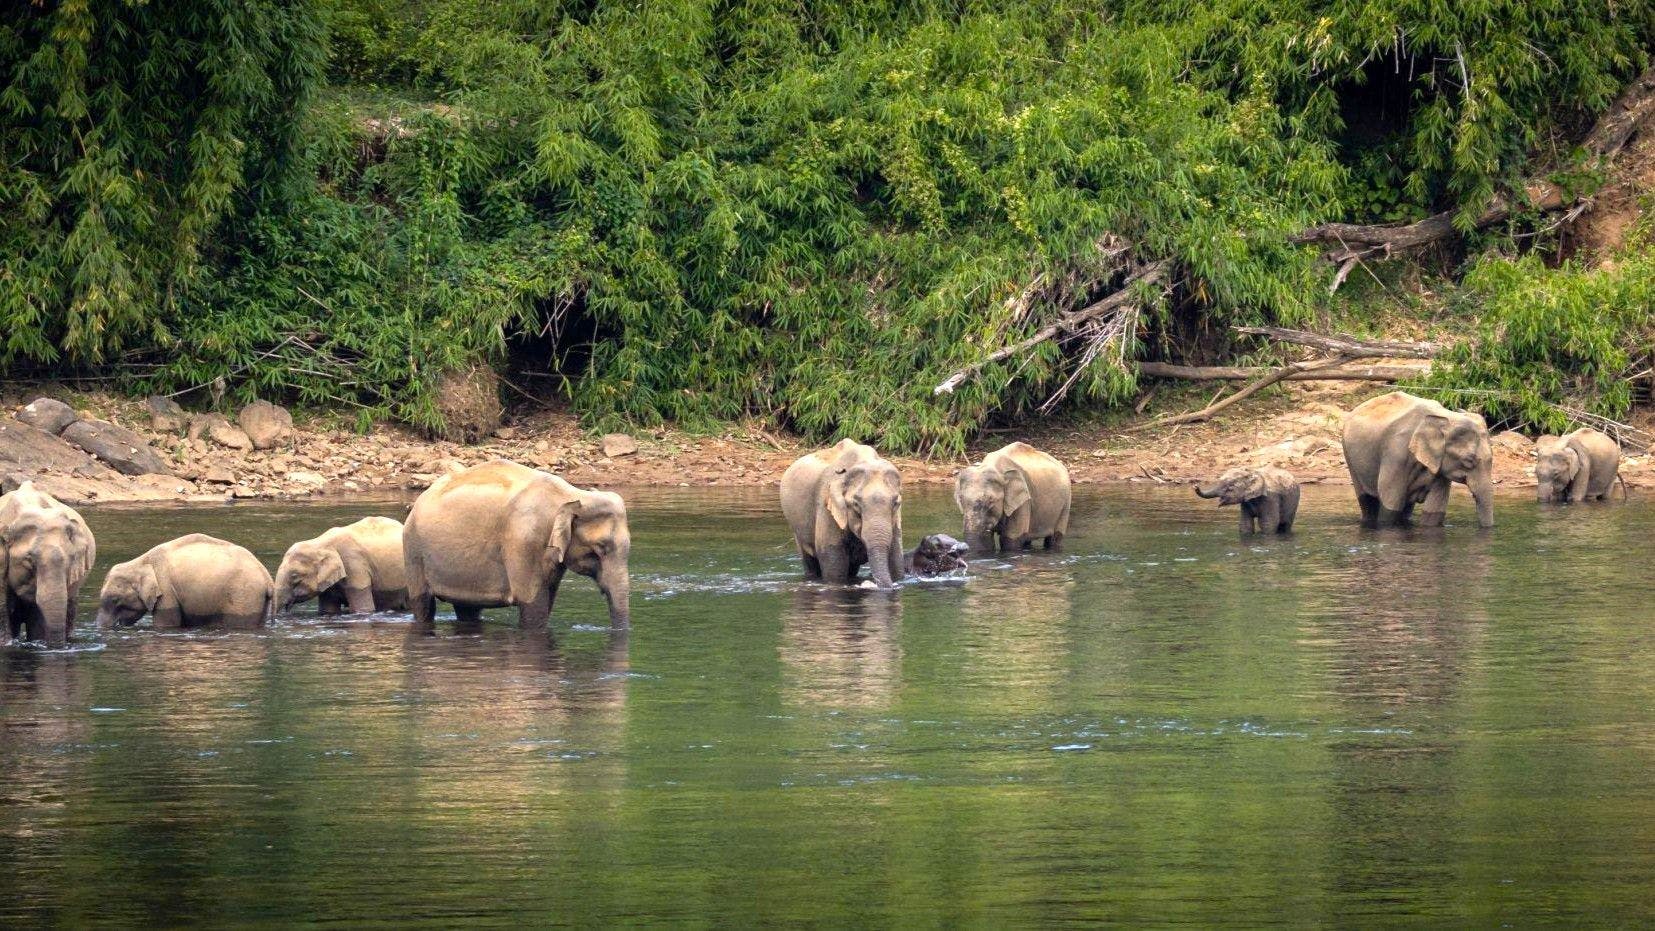 Image of wildlife sanctuary, herd of elephants drinking water from a lake